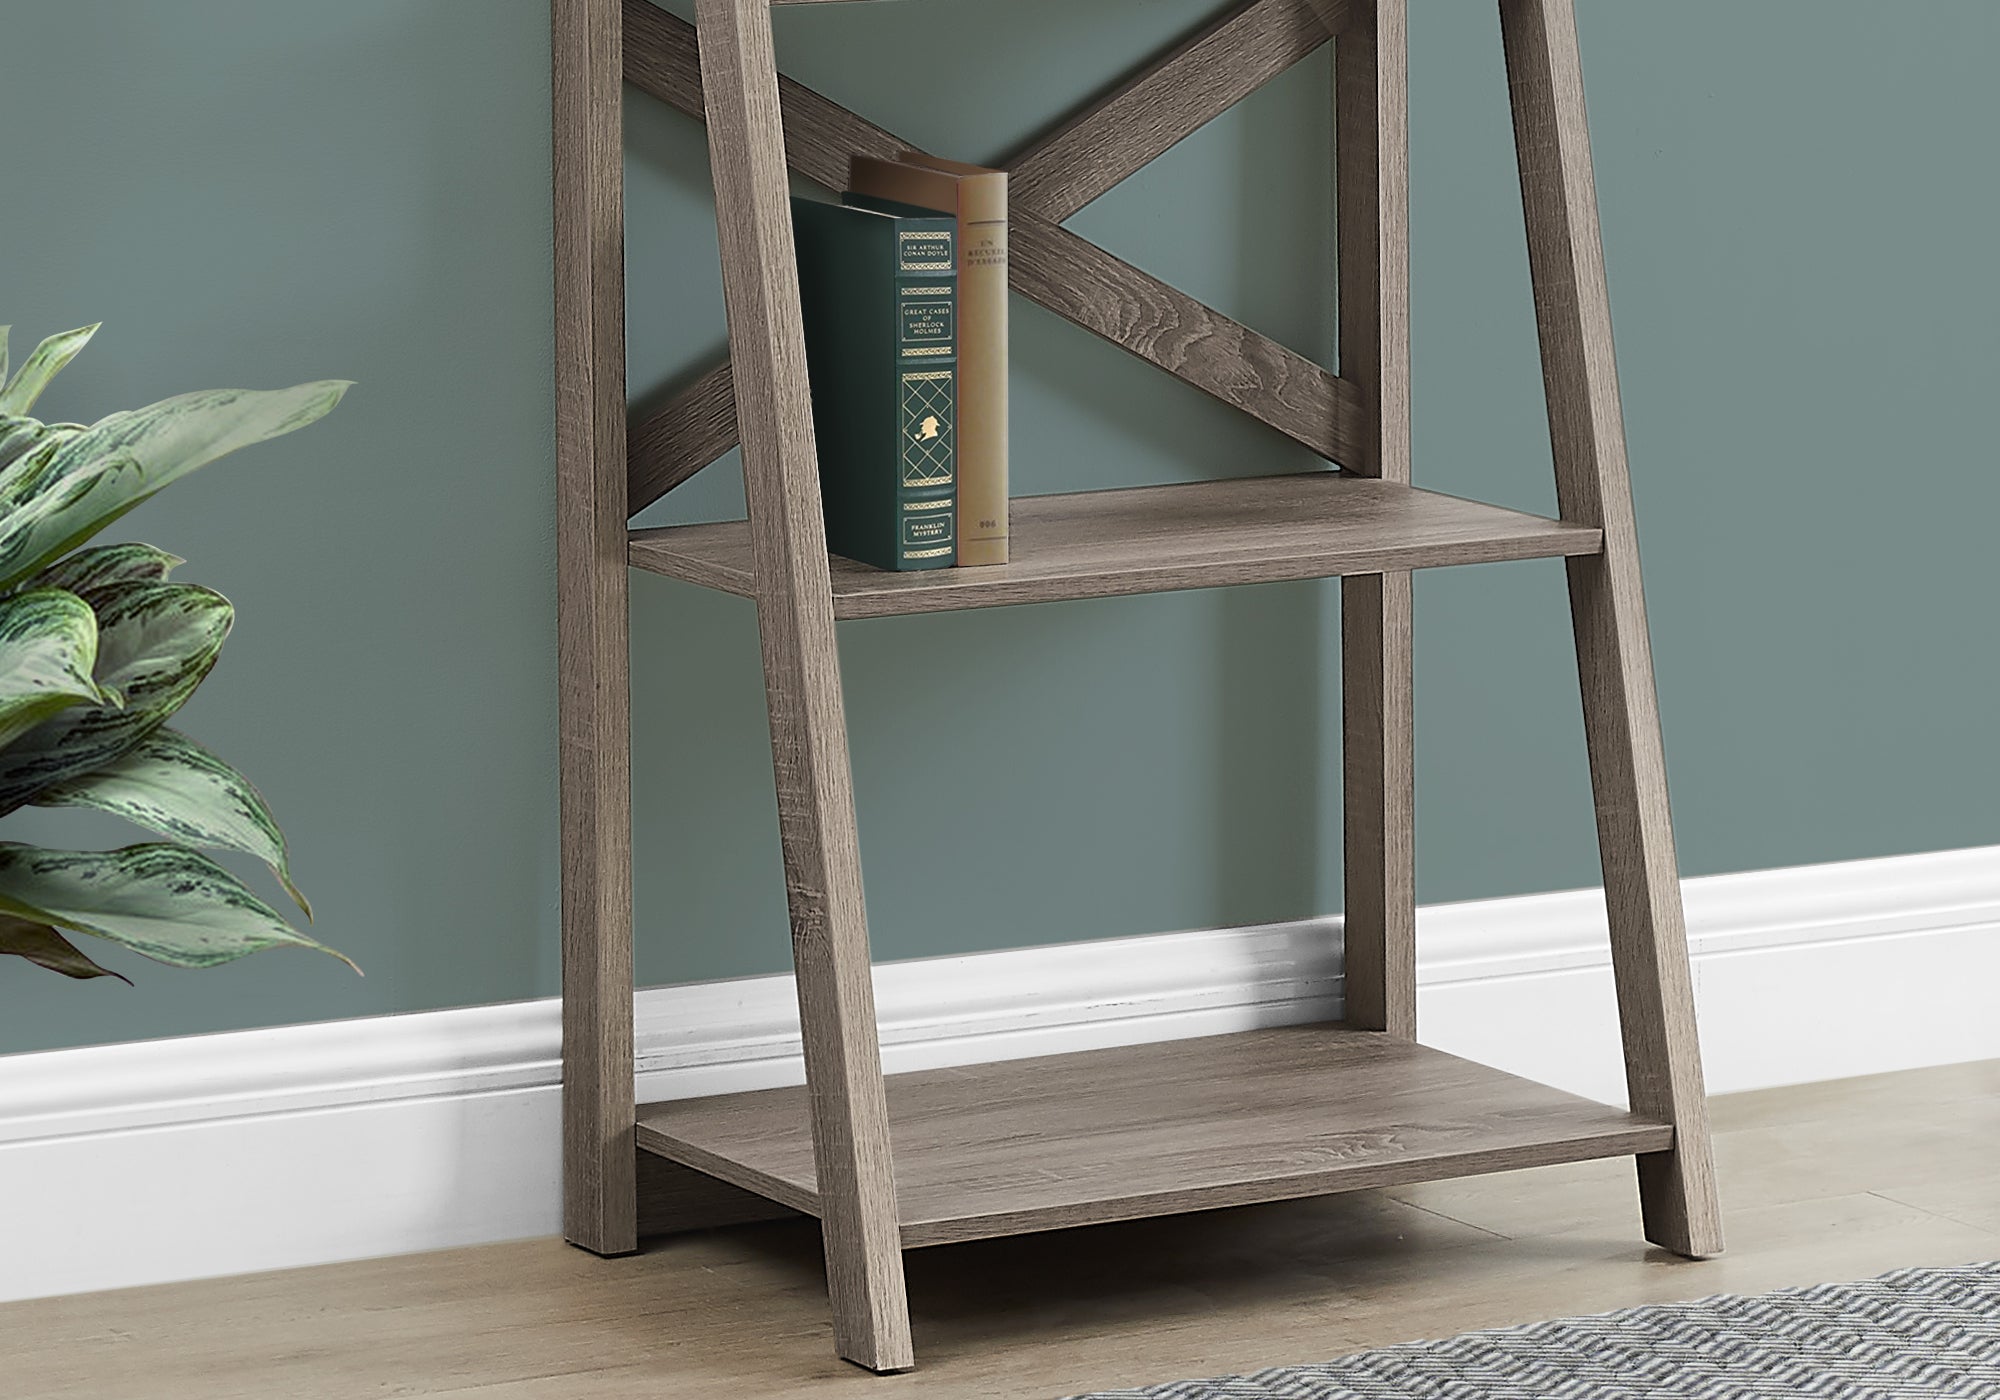 I 2779 - BOOKCASE - 60"H / DARK TAUPE LADDER WITH 4 SHELVES BY MONARCH SPECIALTIES INC